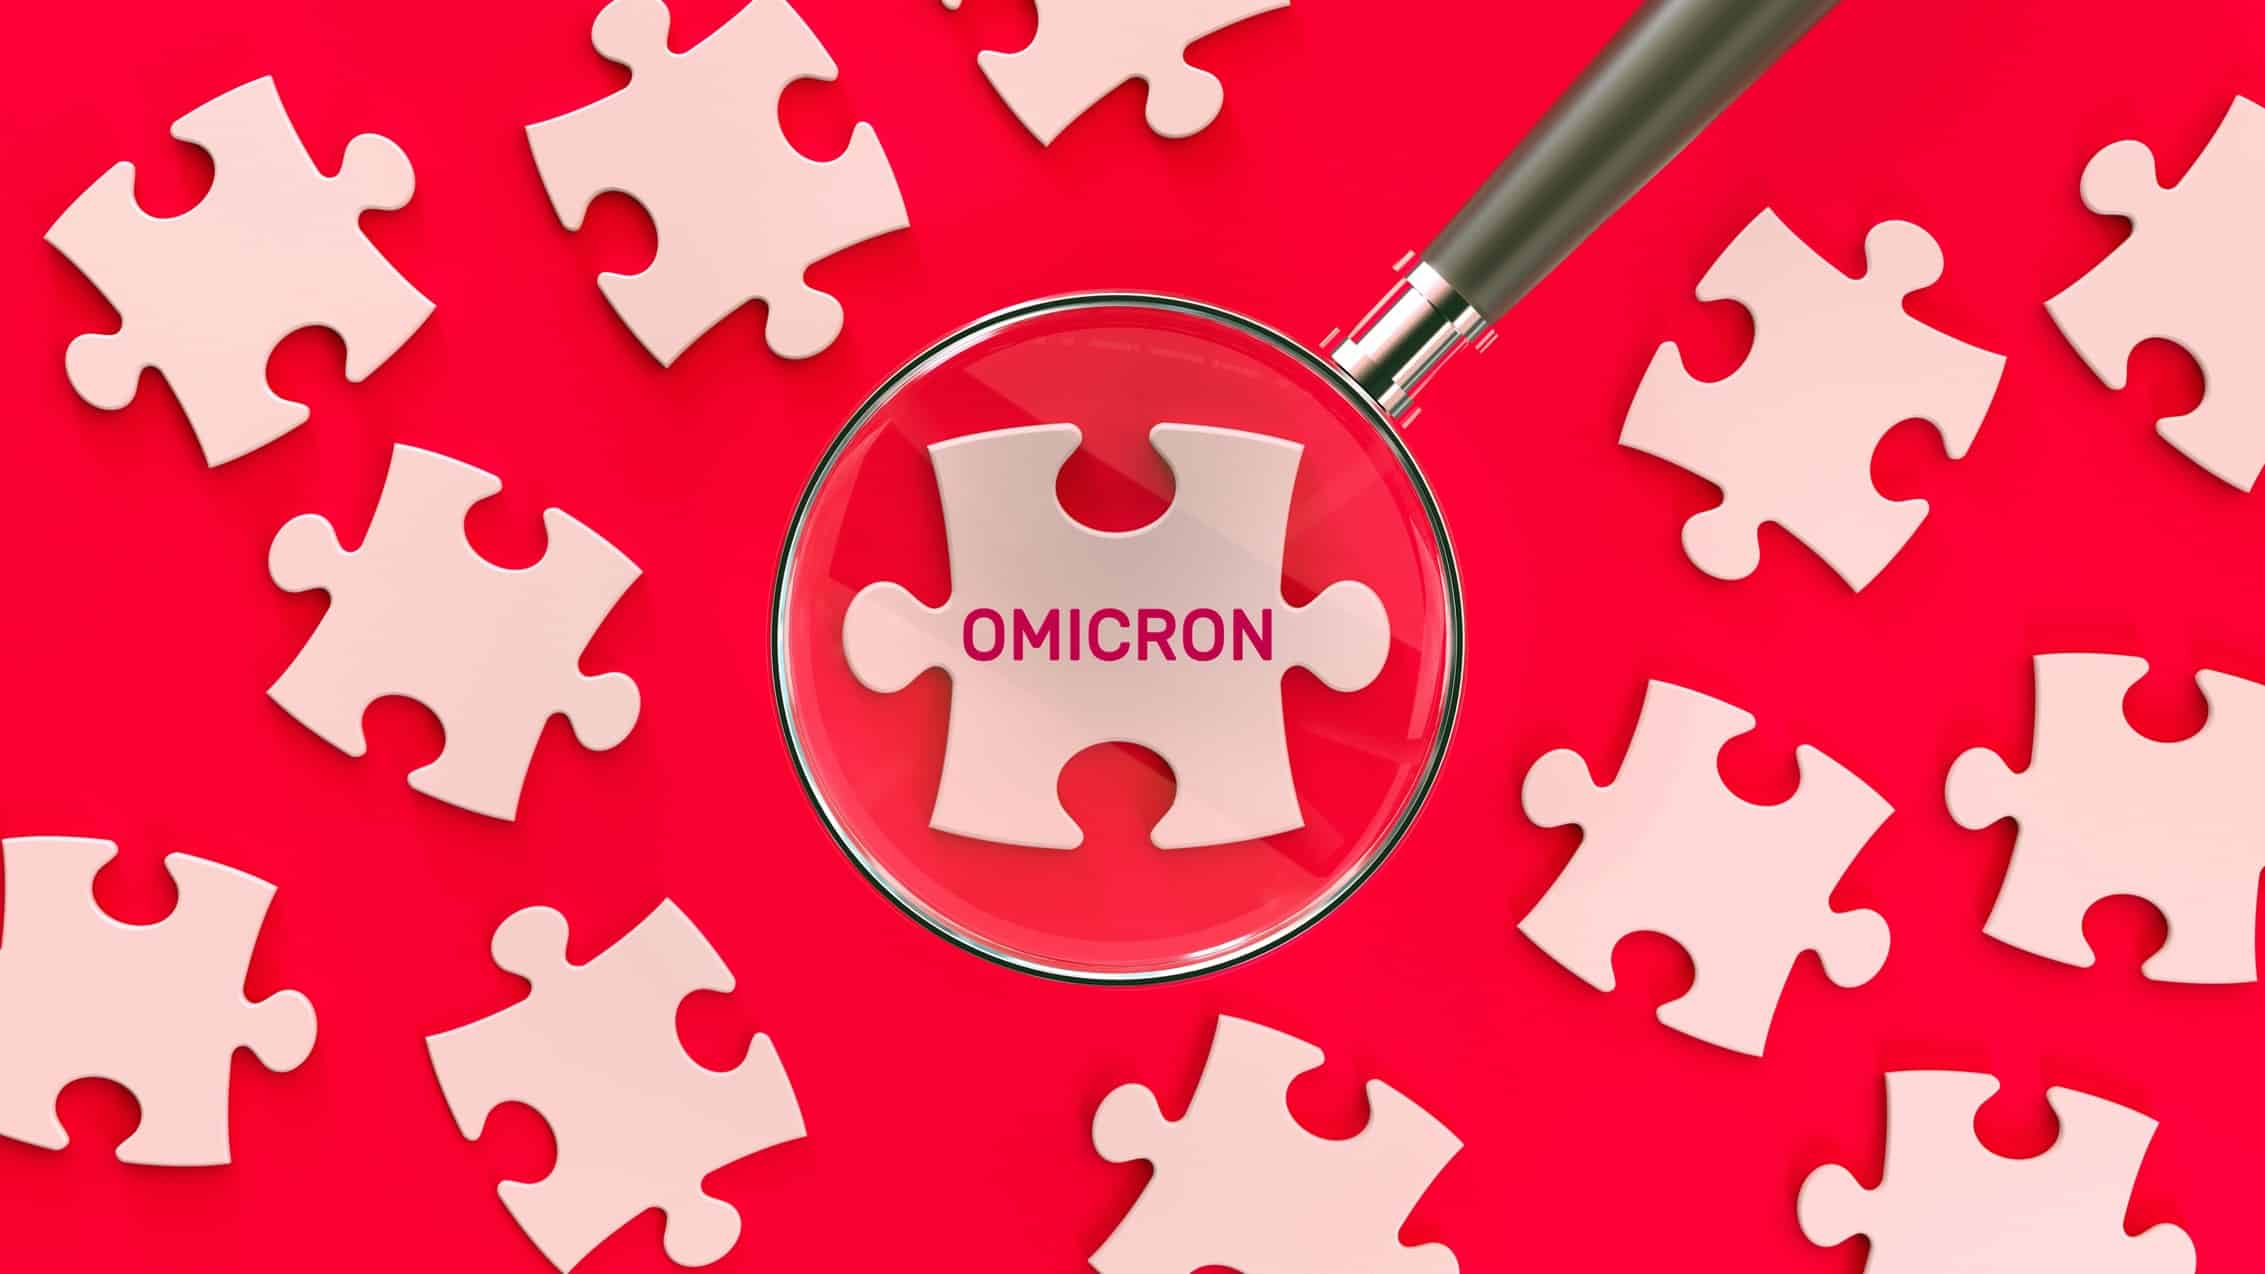 ASX shares Microscope looks at an Omicron piece of jigsaw puzzle